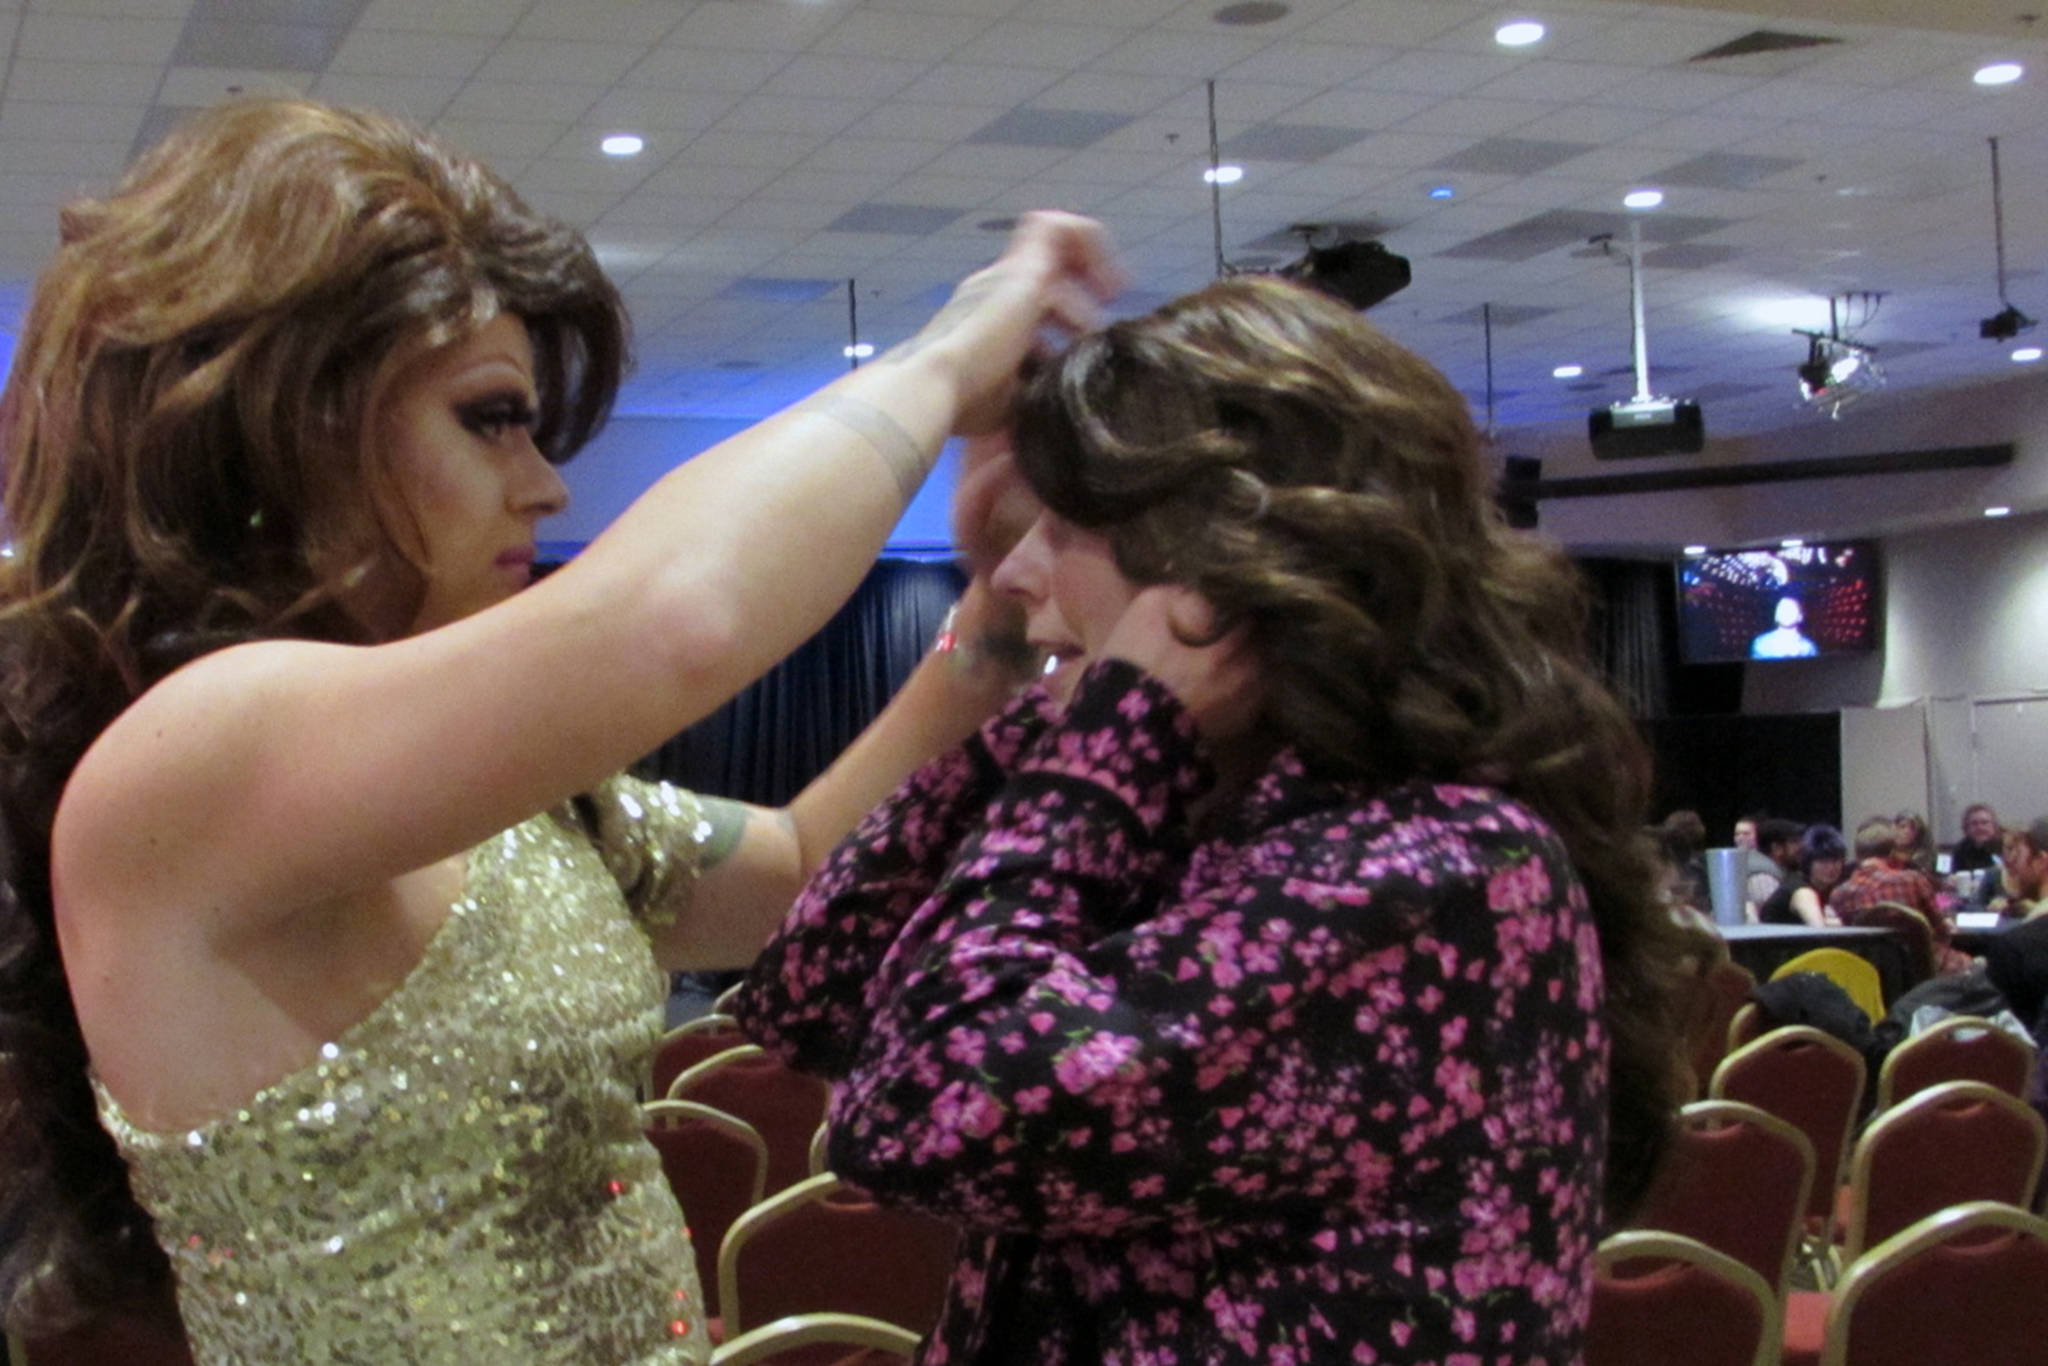 Drag queen Lituya Hart helps Mary Folletti Cruise swap out her black cap for a wig before the Besties for Breasties drag show, which benefitted Folletti Cruise. Folletti Cruise said she was impressed by the community support she has received since her breast-cancer diagnosis. (Ben Hohenstatt | Capital City Weekly)